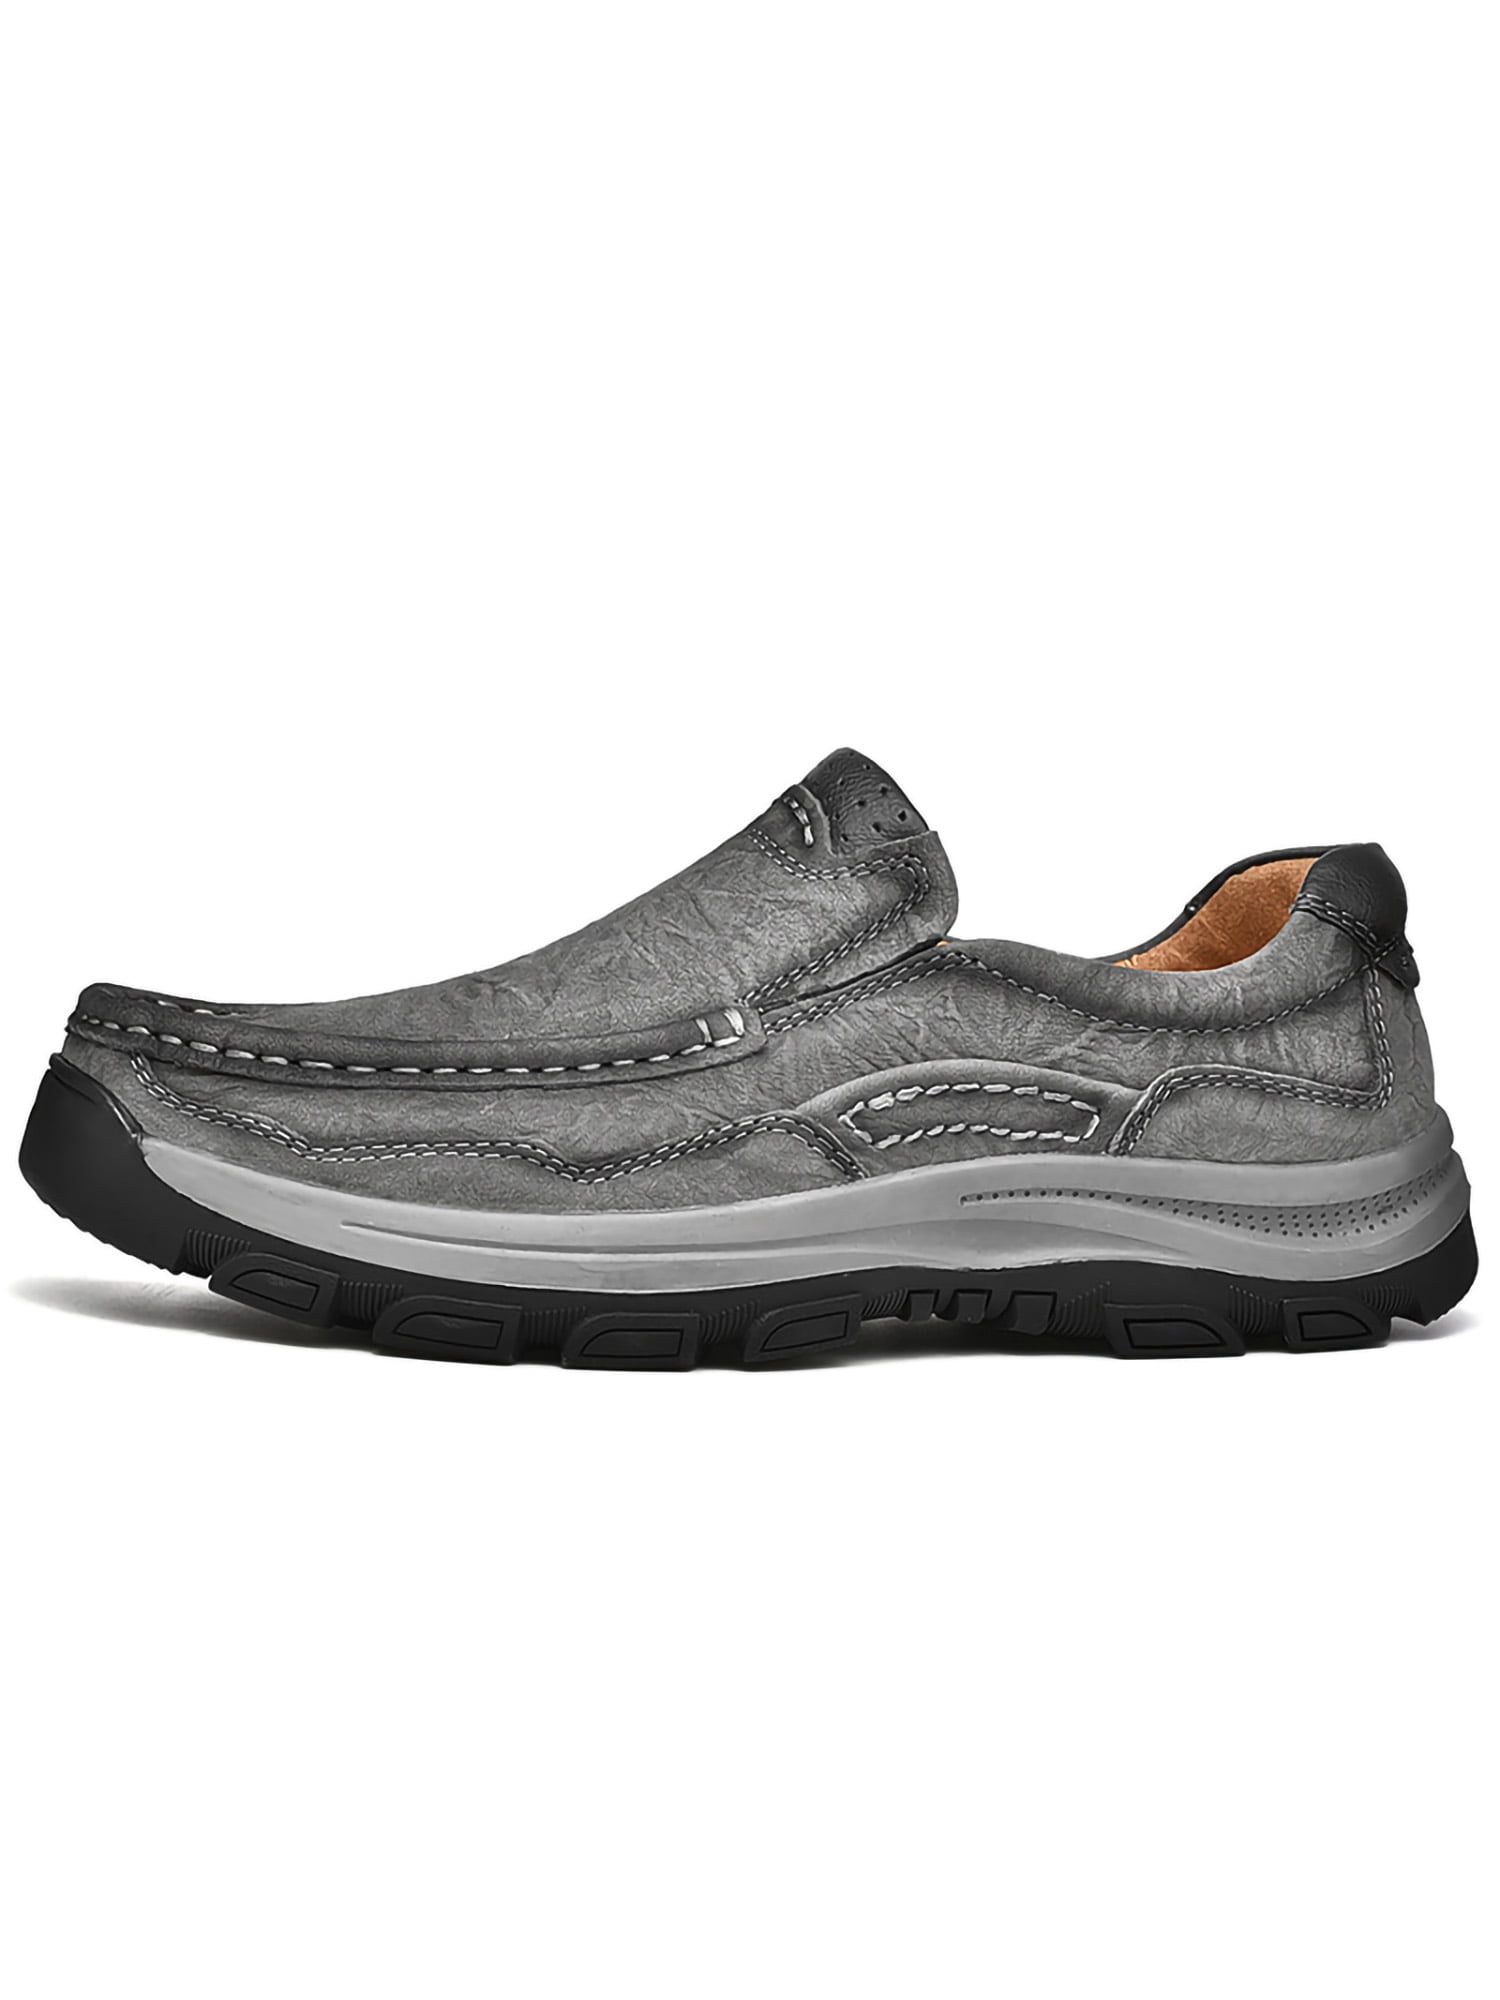 Lumento Mens Loafers Driving Flats On Casual Shoes Rugged Moccasin Walking Wide Comfort Boat Shoe Gray 9.5 -